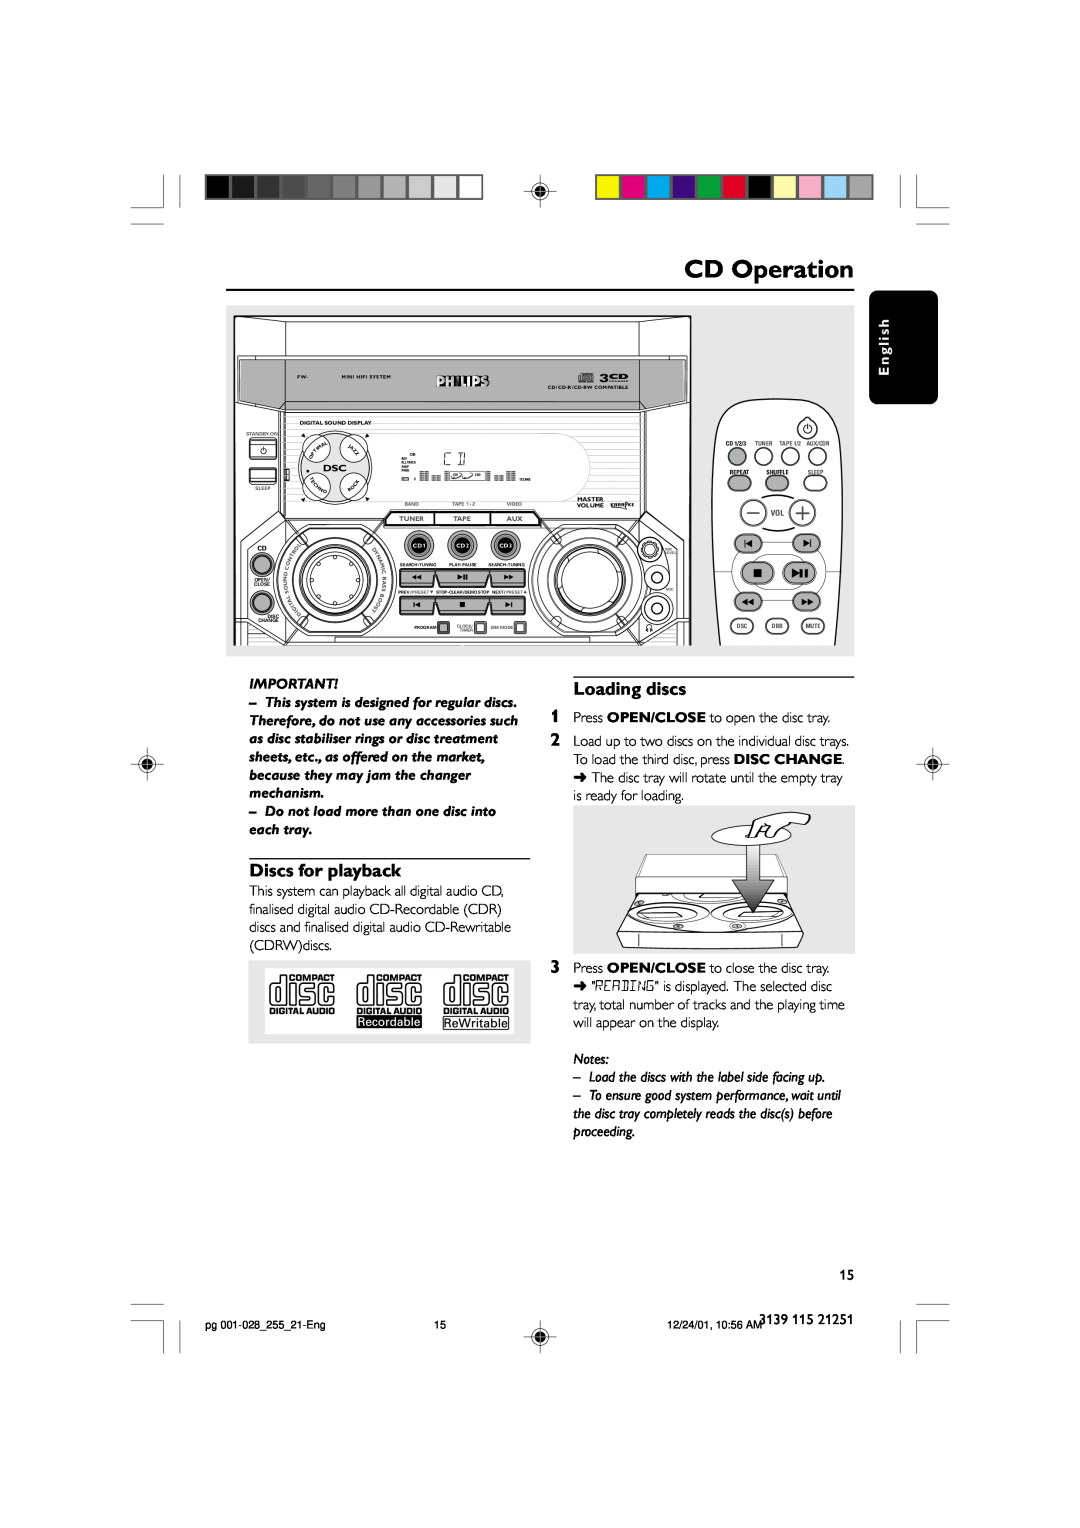 Philips C255 CD Operation, Loading discs, English, Press OPEN/CLOSE to open the disc tray, mechanism, is ready for loading 